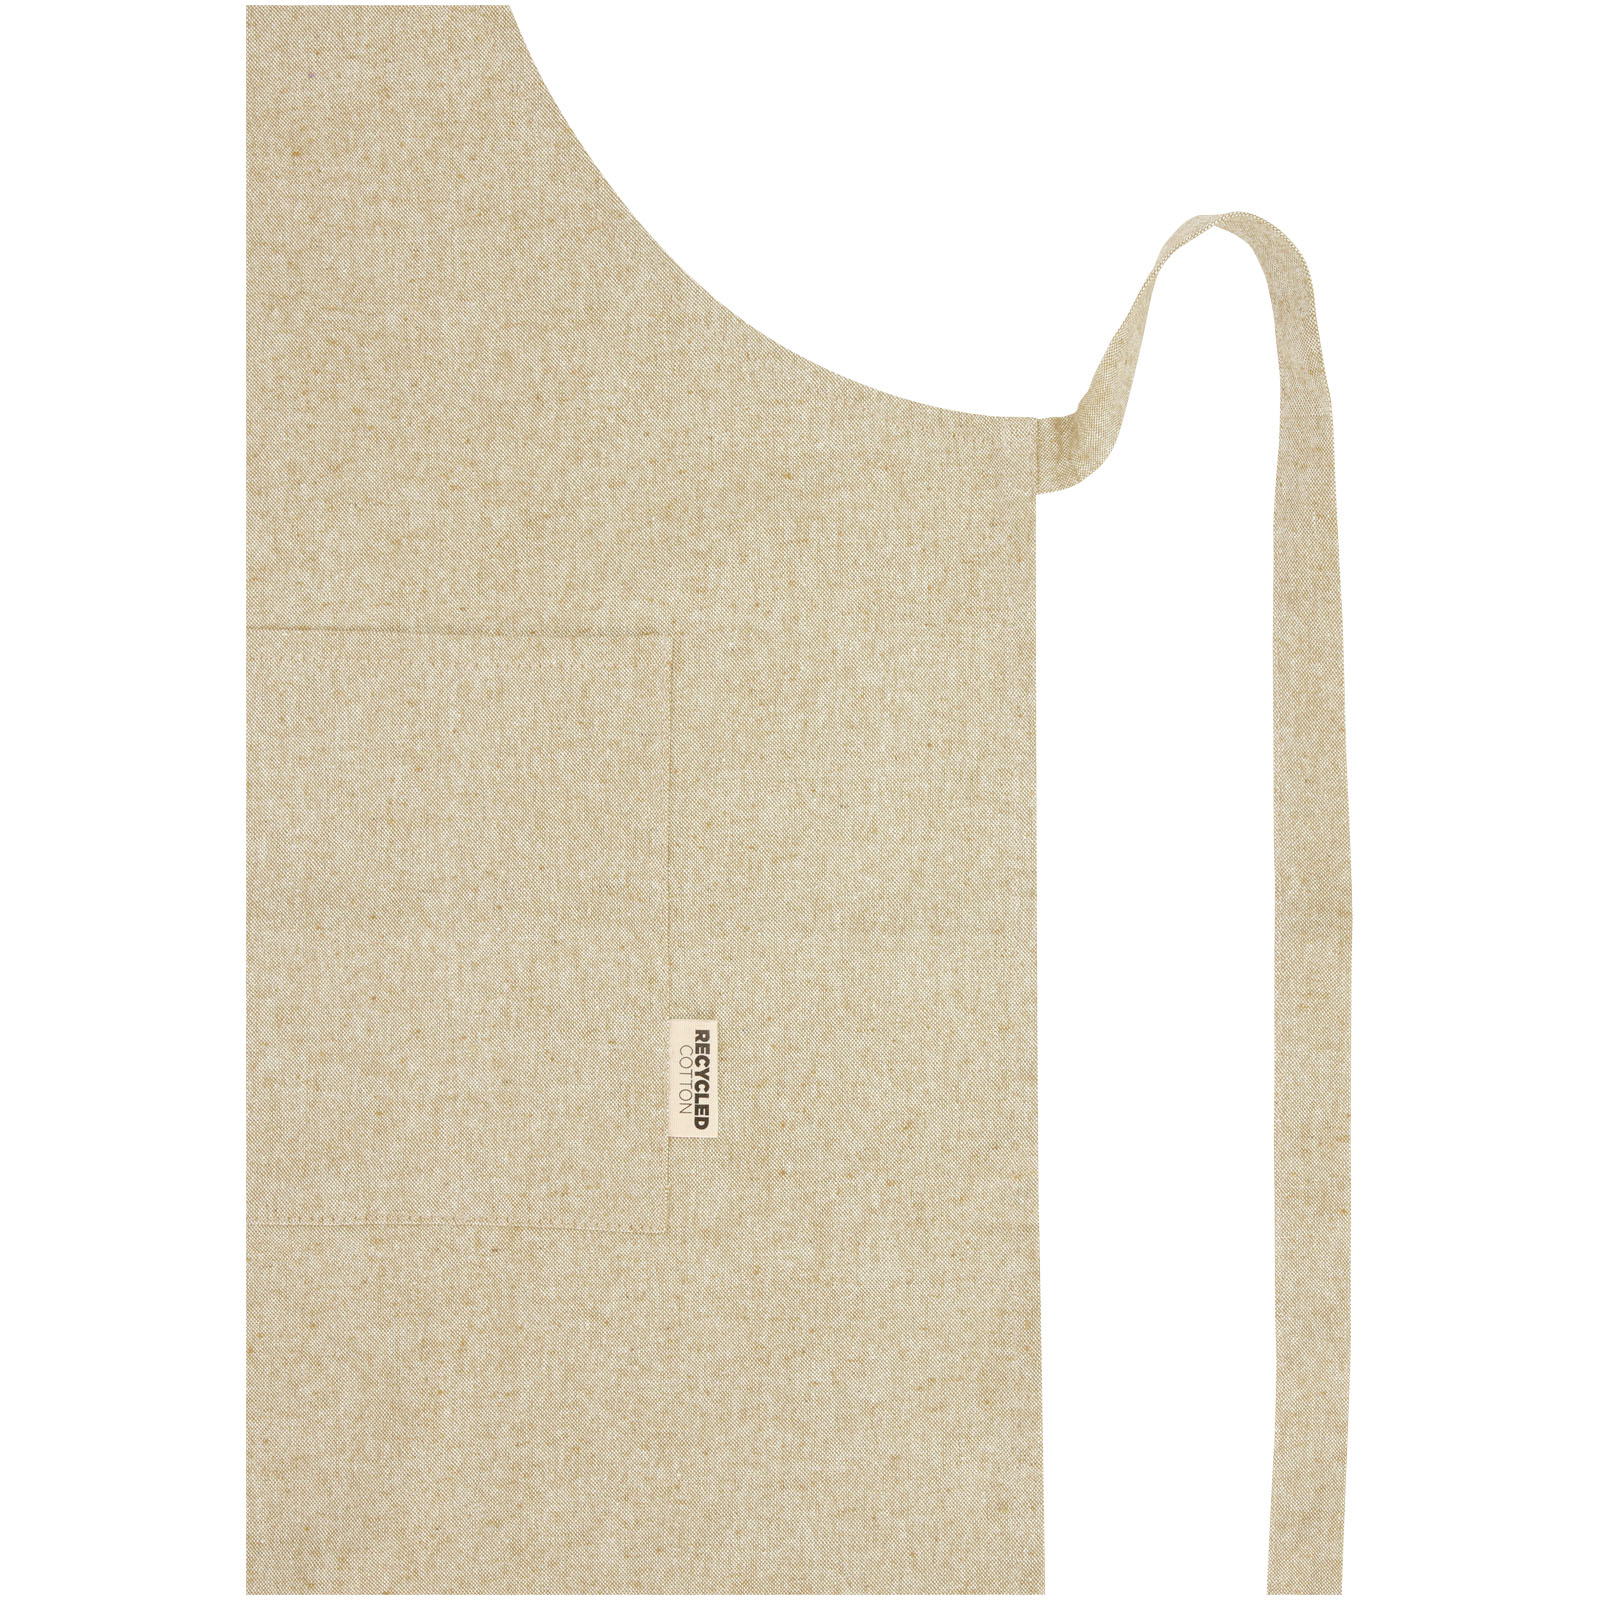 Advertising Aprons - Pheebs 200 g/m² recycled cotton apron - 2